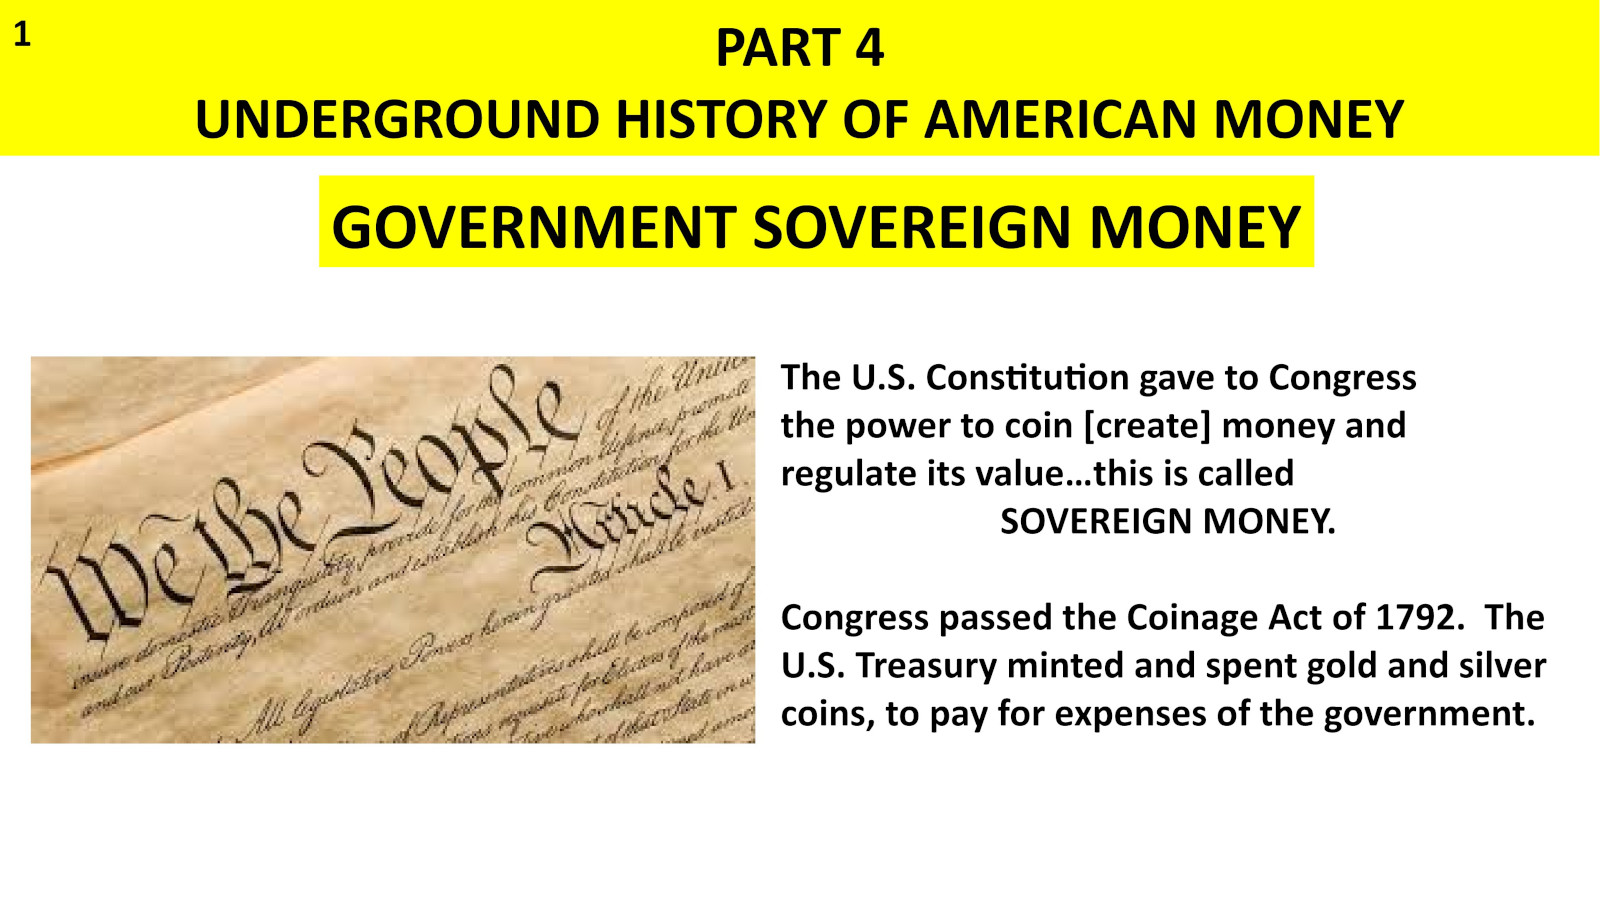 U.S. sovereign money; Coinage Act of 1792